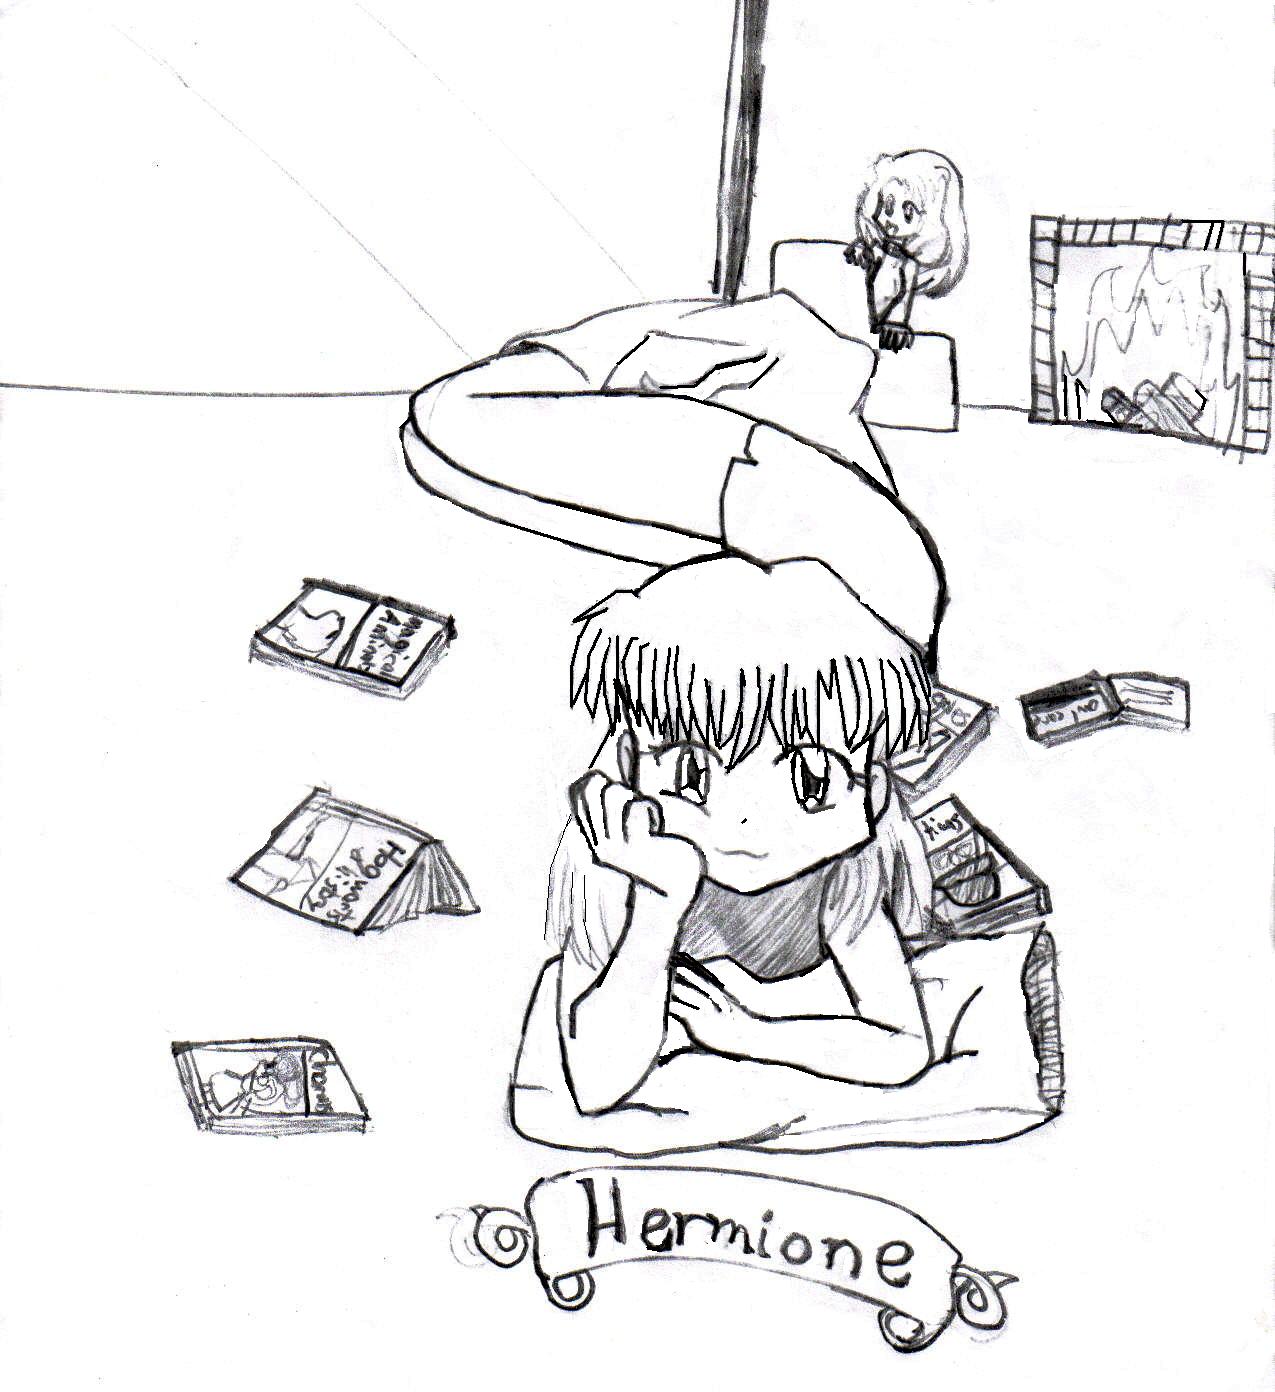 Hermione Studying by lucky_cat